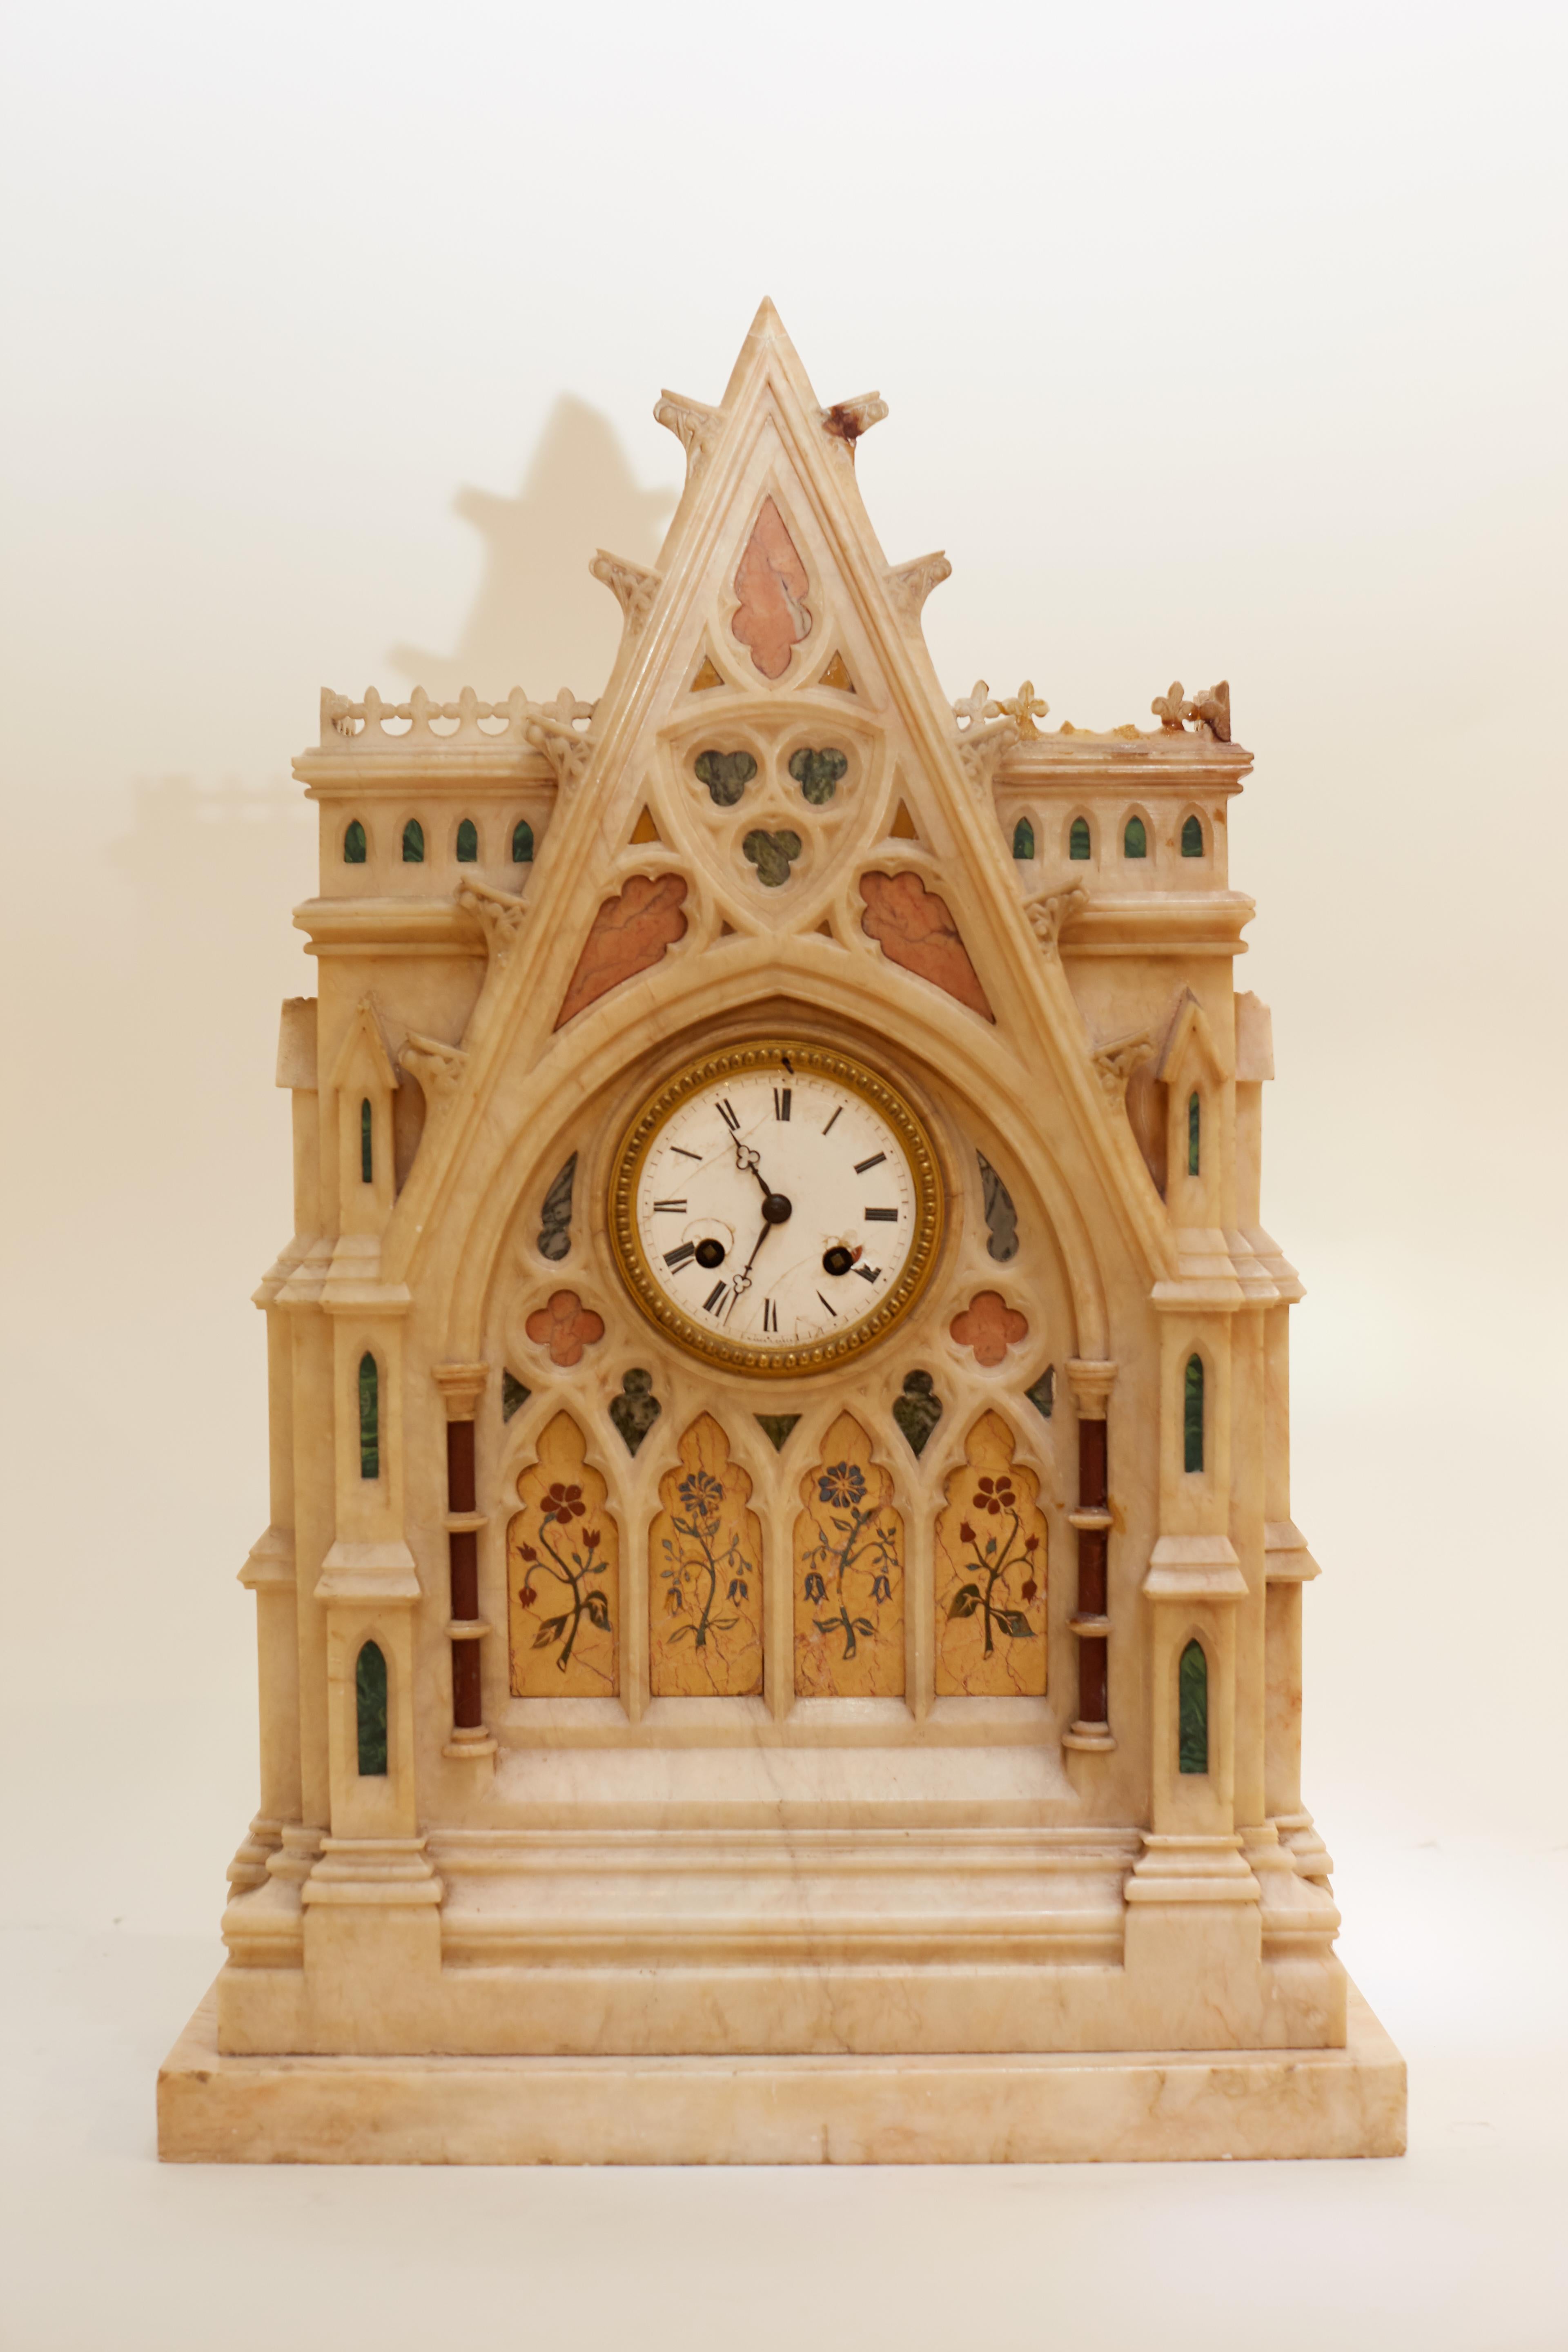 French Gothic Style Inlaid Marble Mantel Clock Dial Signed H. Azur à Paris In Fair Condition For Sale In New York, NY